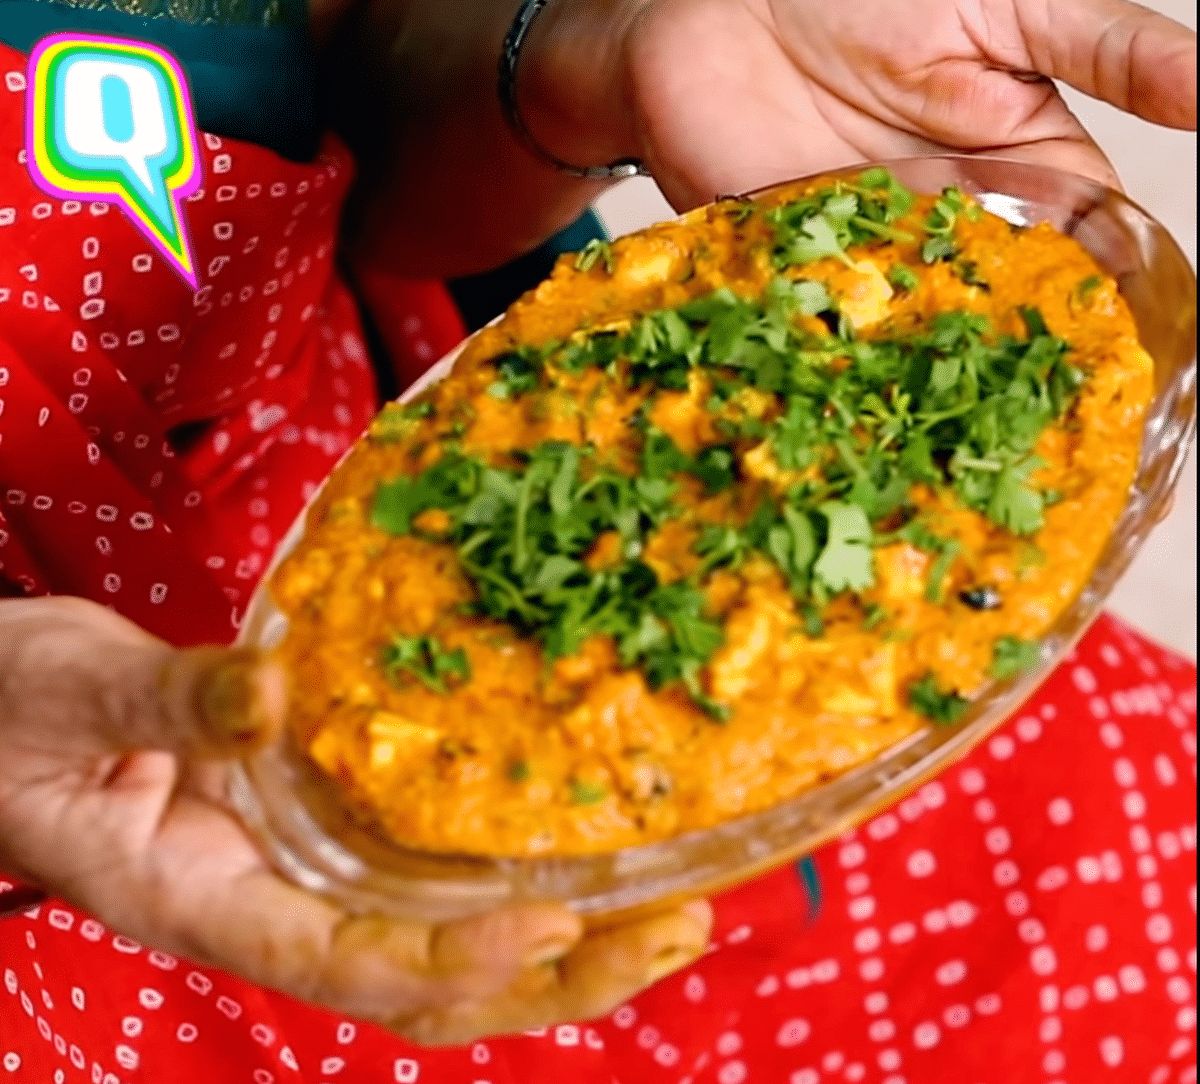 Gujjuben is back with a delicious matar paneer recipe.